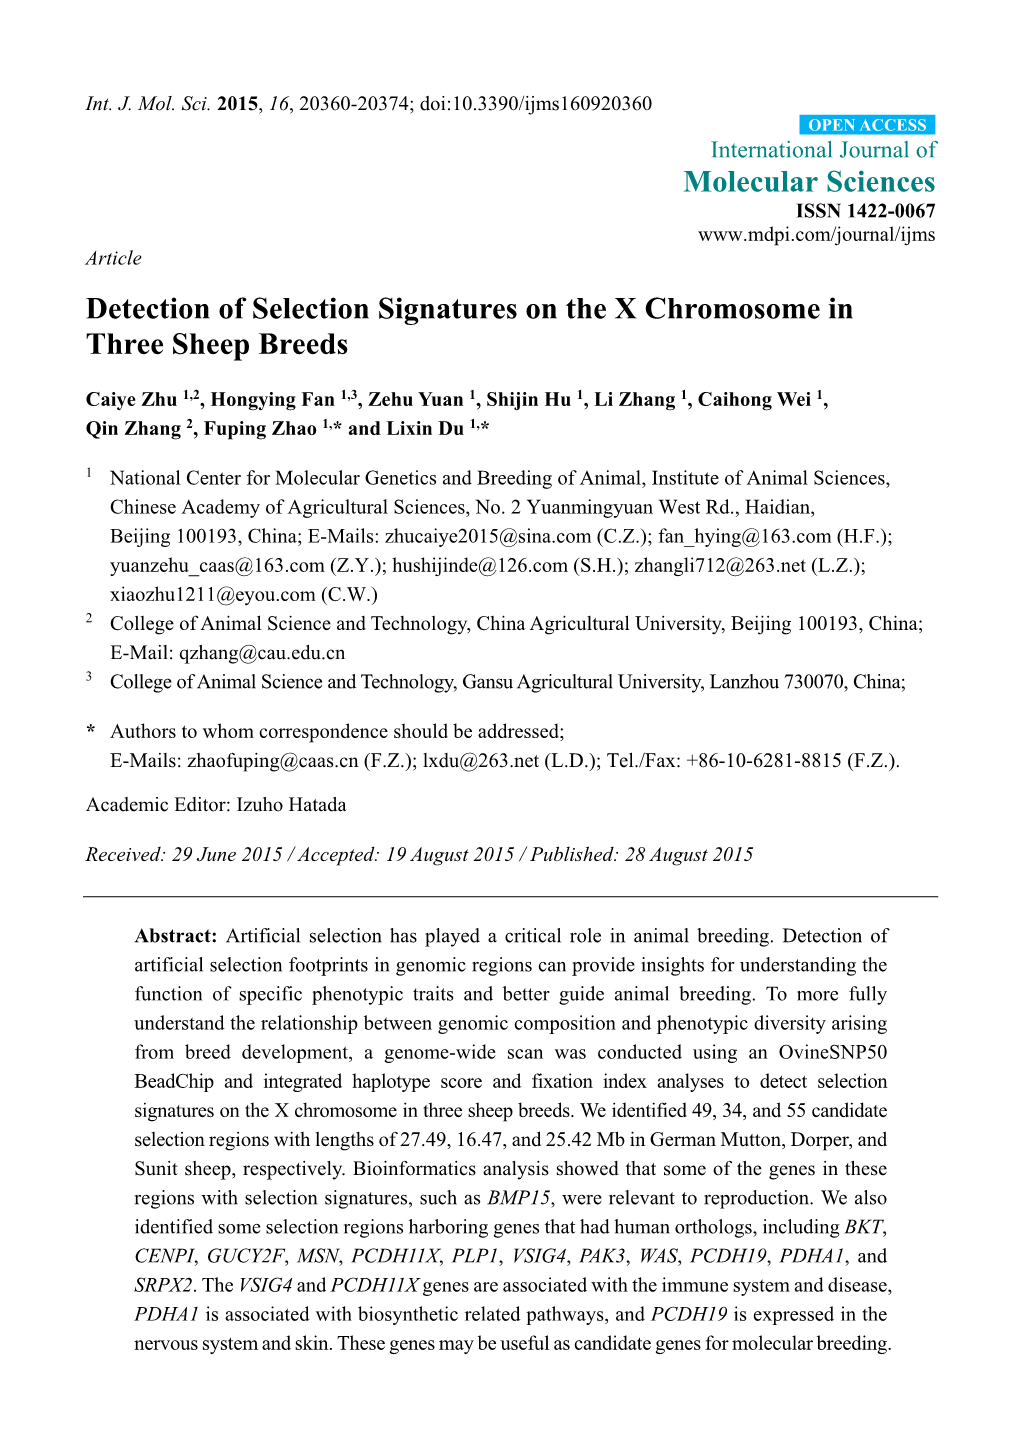 Detection of Selection Signatures on the X Chromosome in Three Sheep Breeds